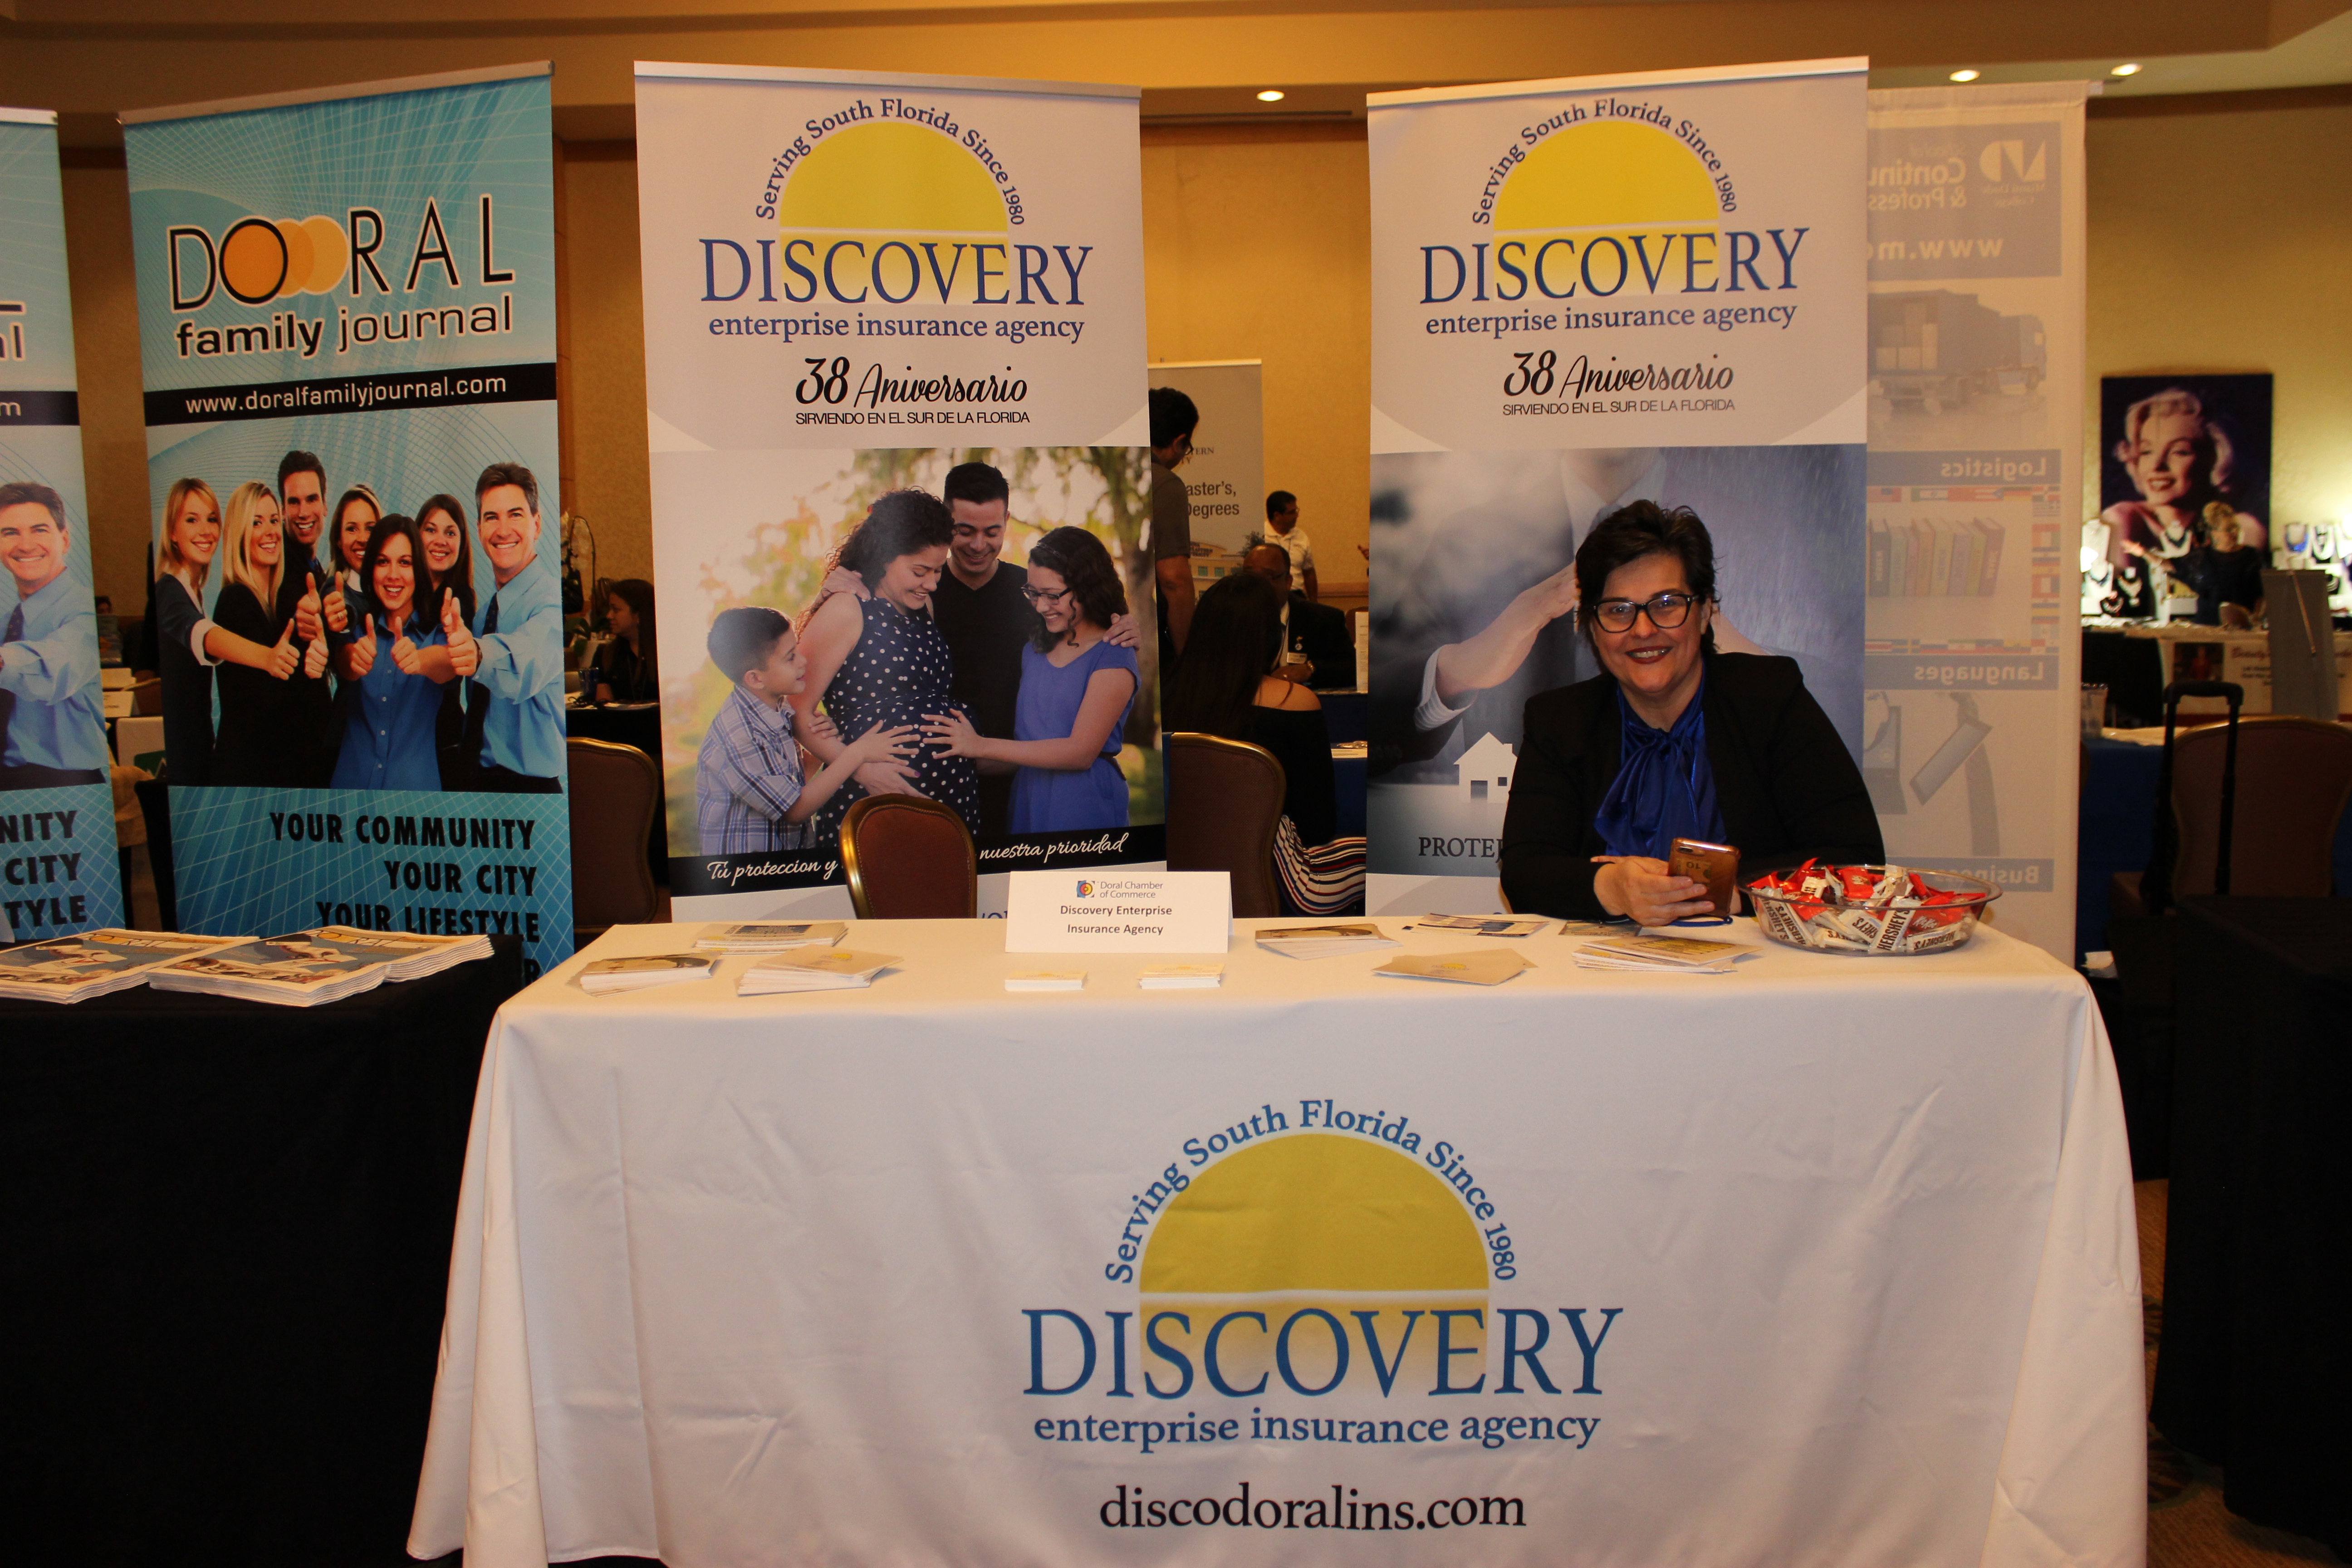 Discovery Enterprise Insurance Agency representing business in ExpoMiami 2018 hosted by Doral Chamber of Commerce.